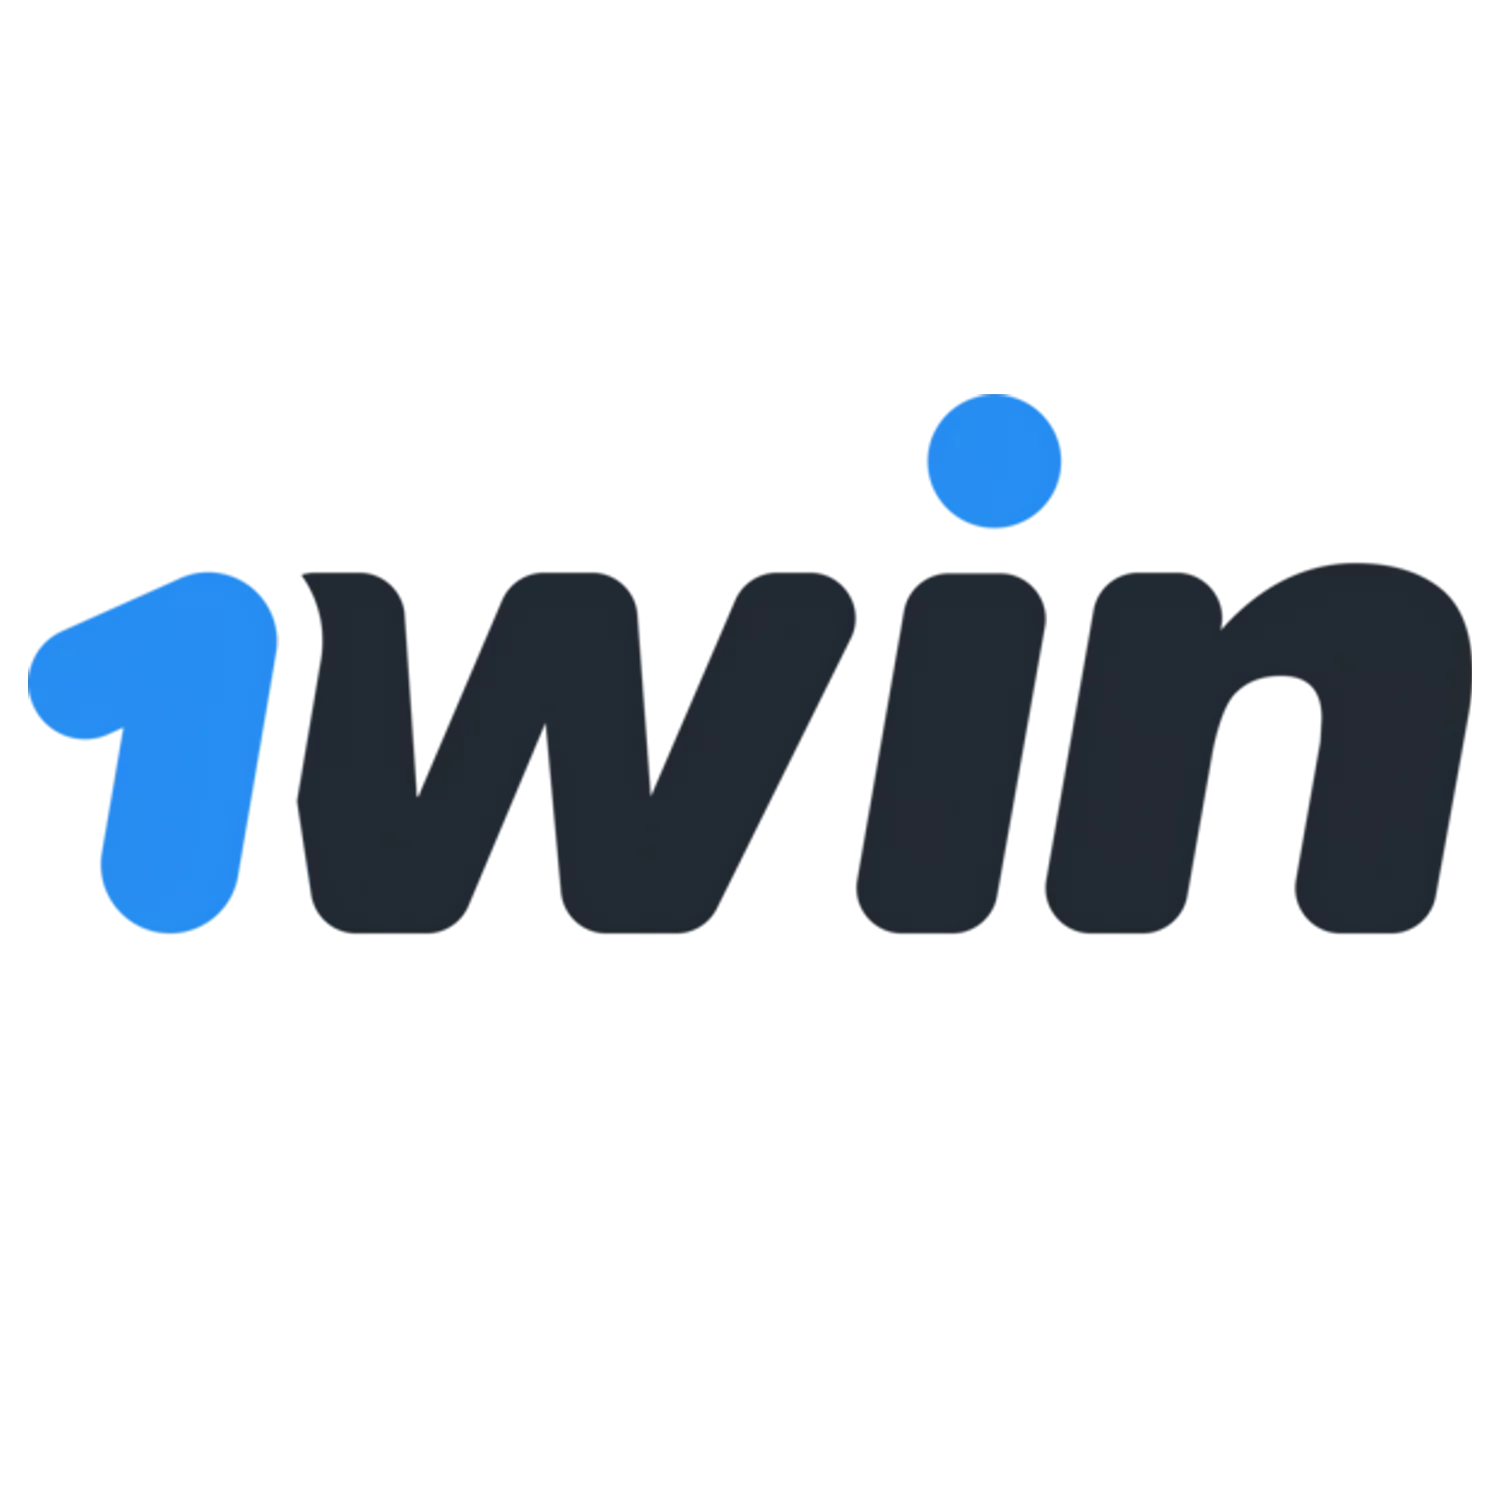 Watch the video review of the mobile application 1win for Android and iOS.